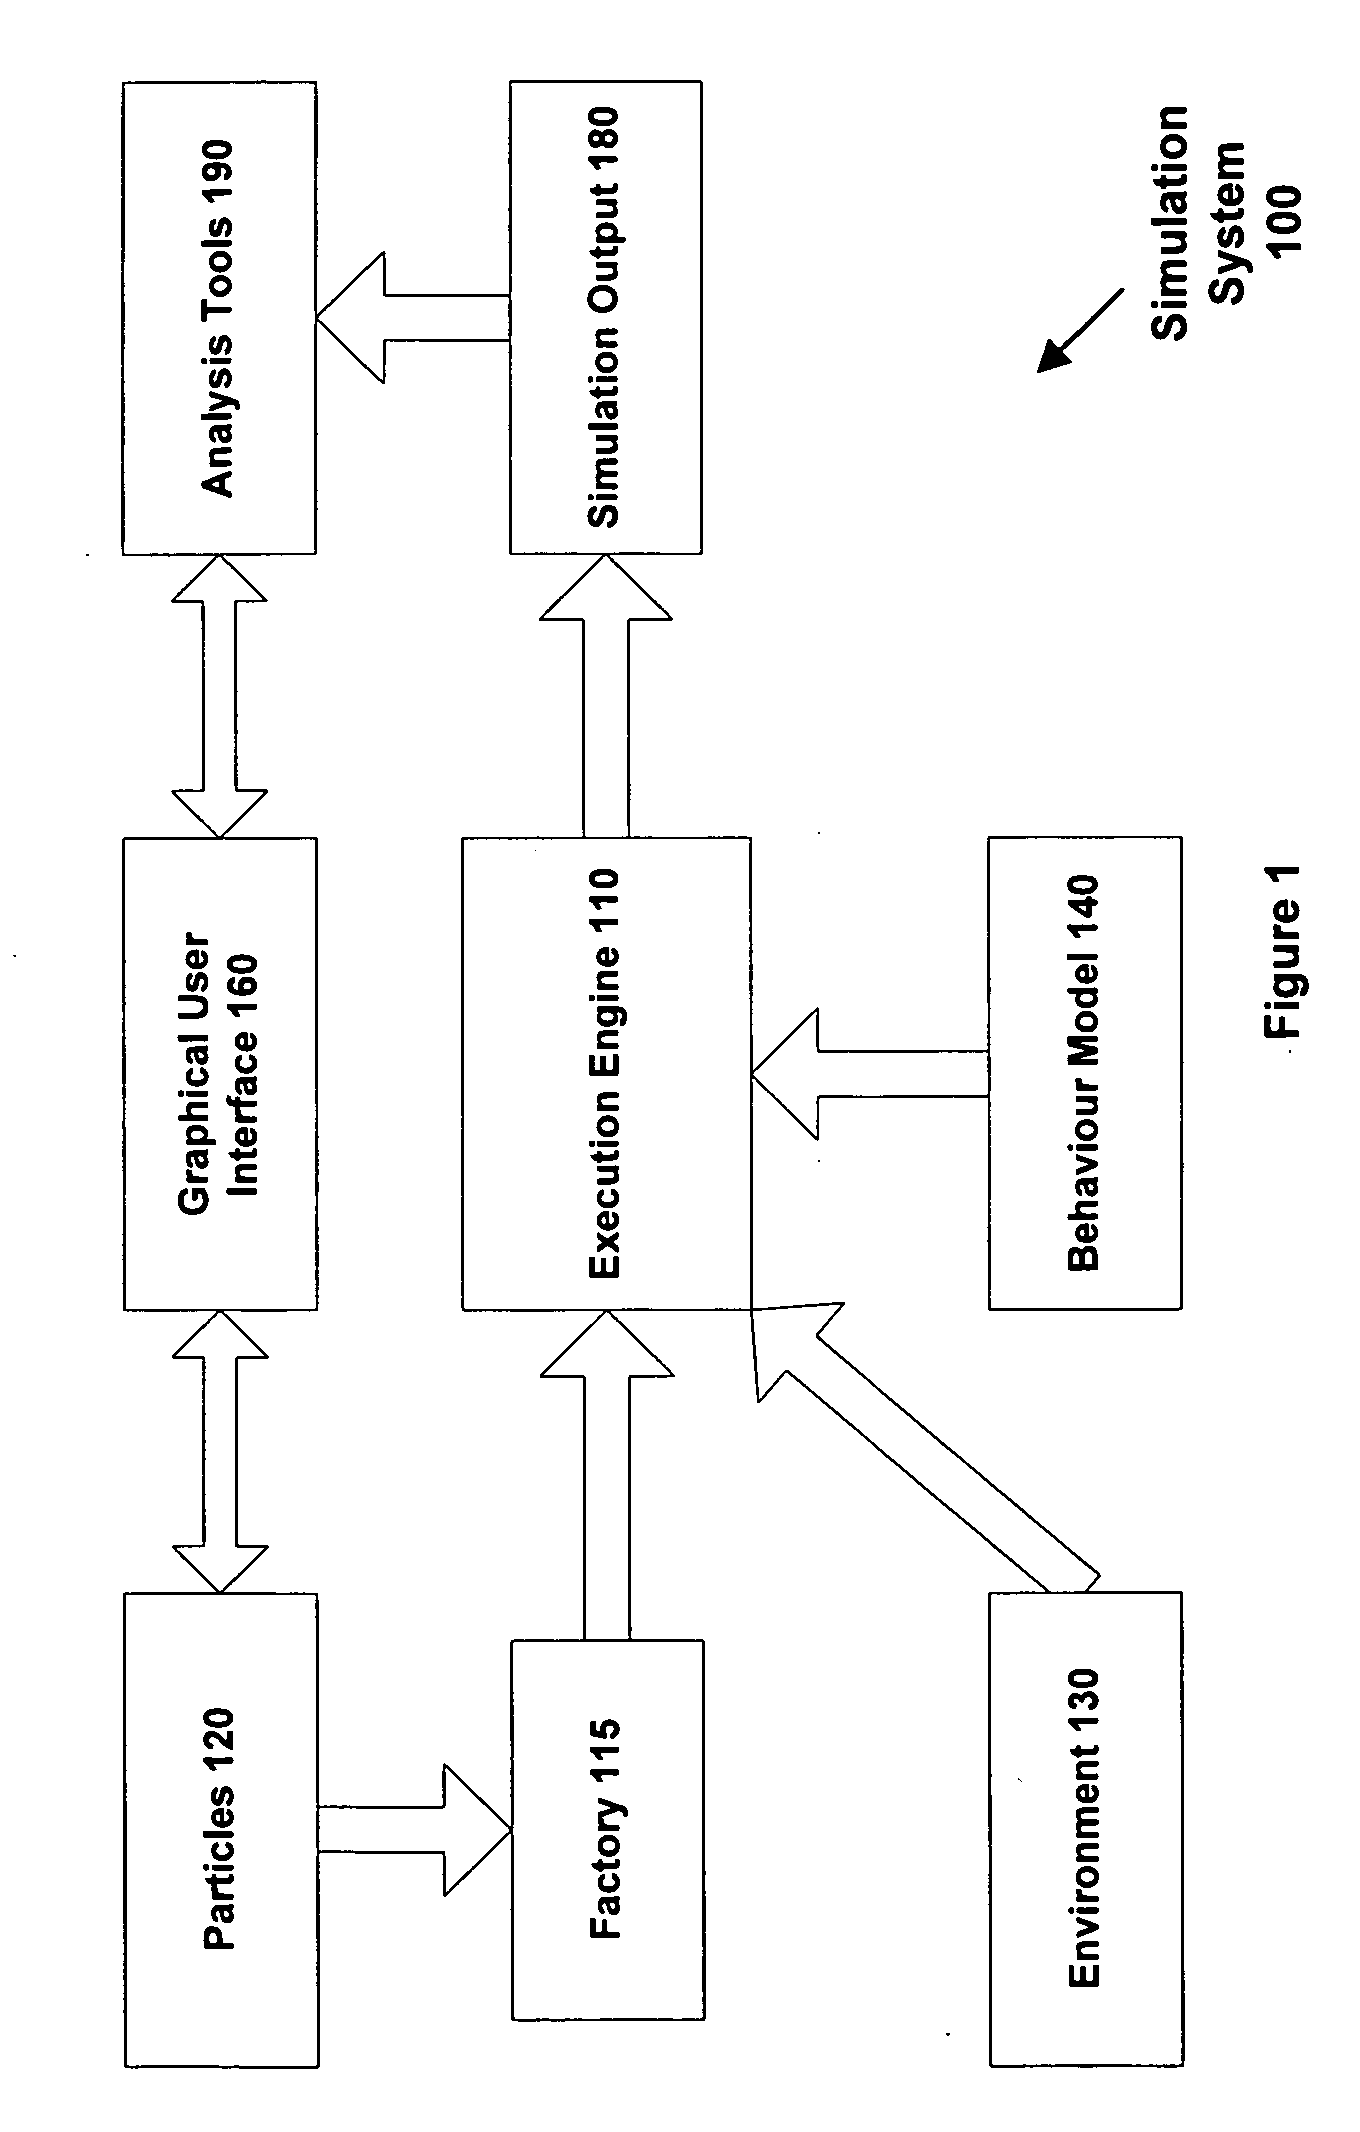 Method and apparatus for simulation by discrete element modeling and supporting customisable particle properties